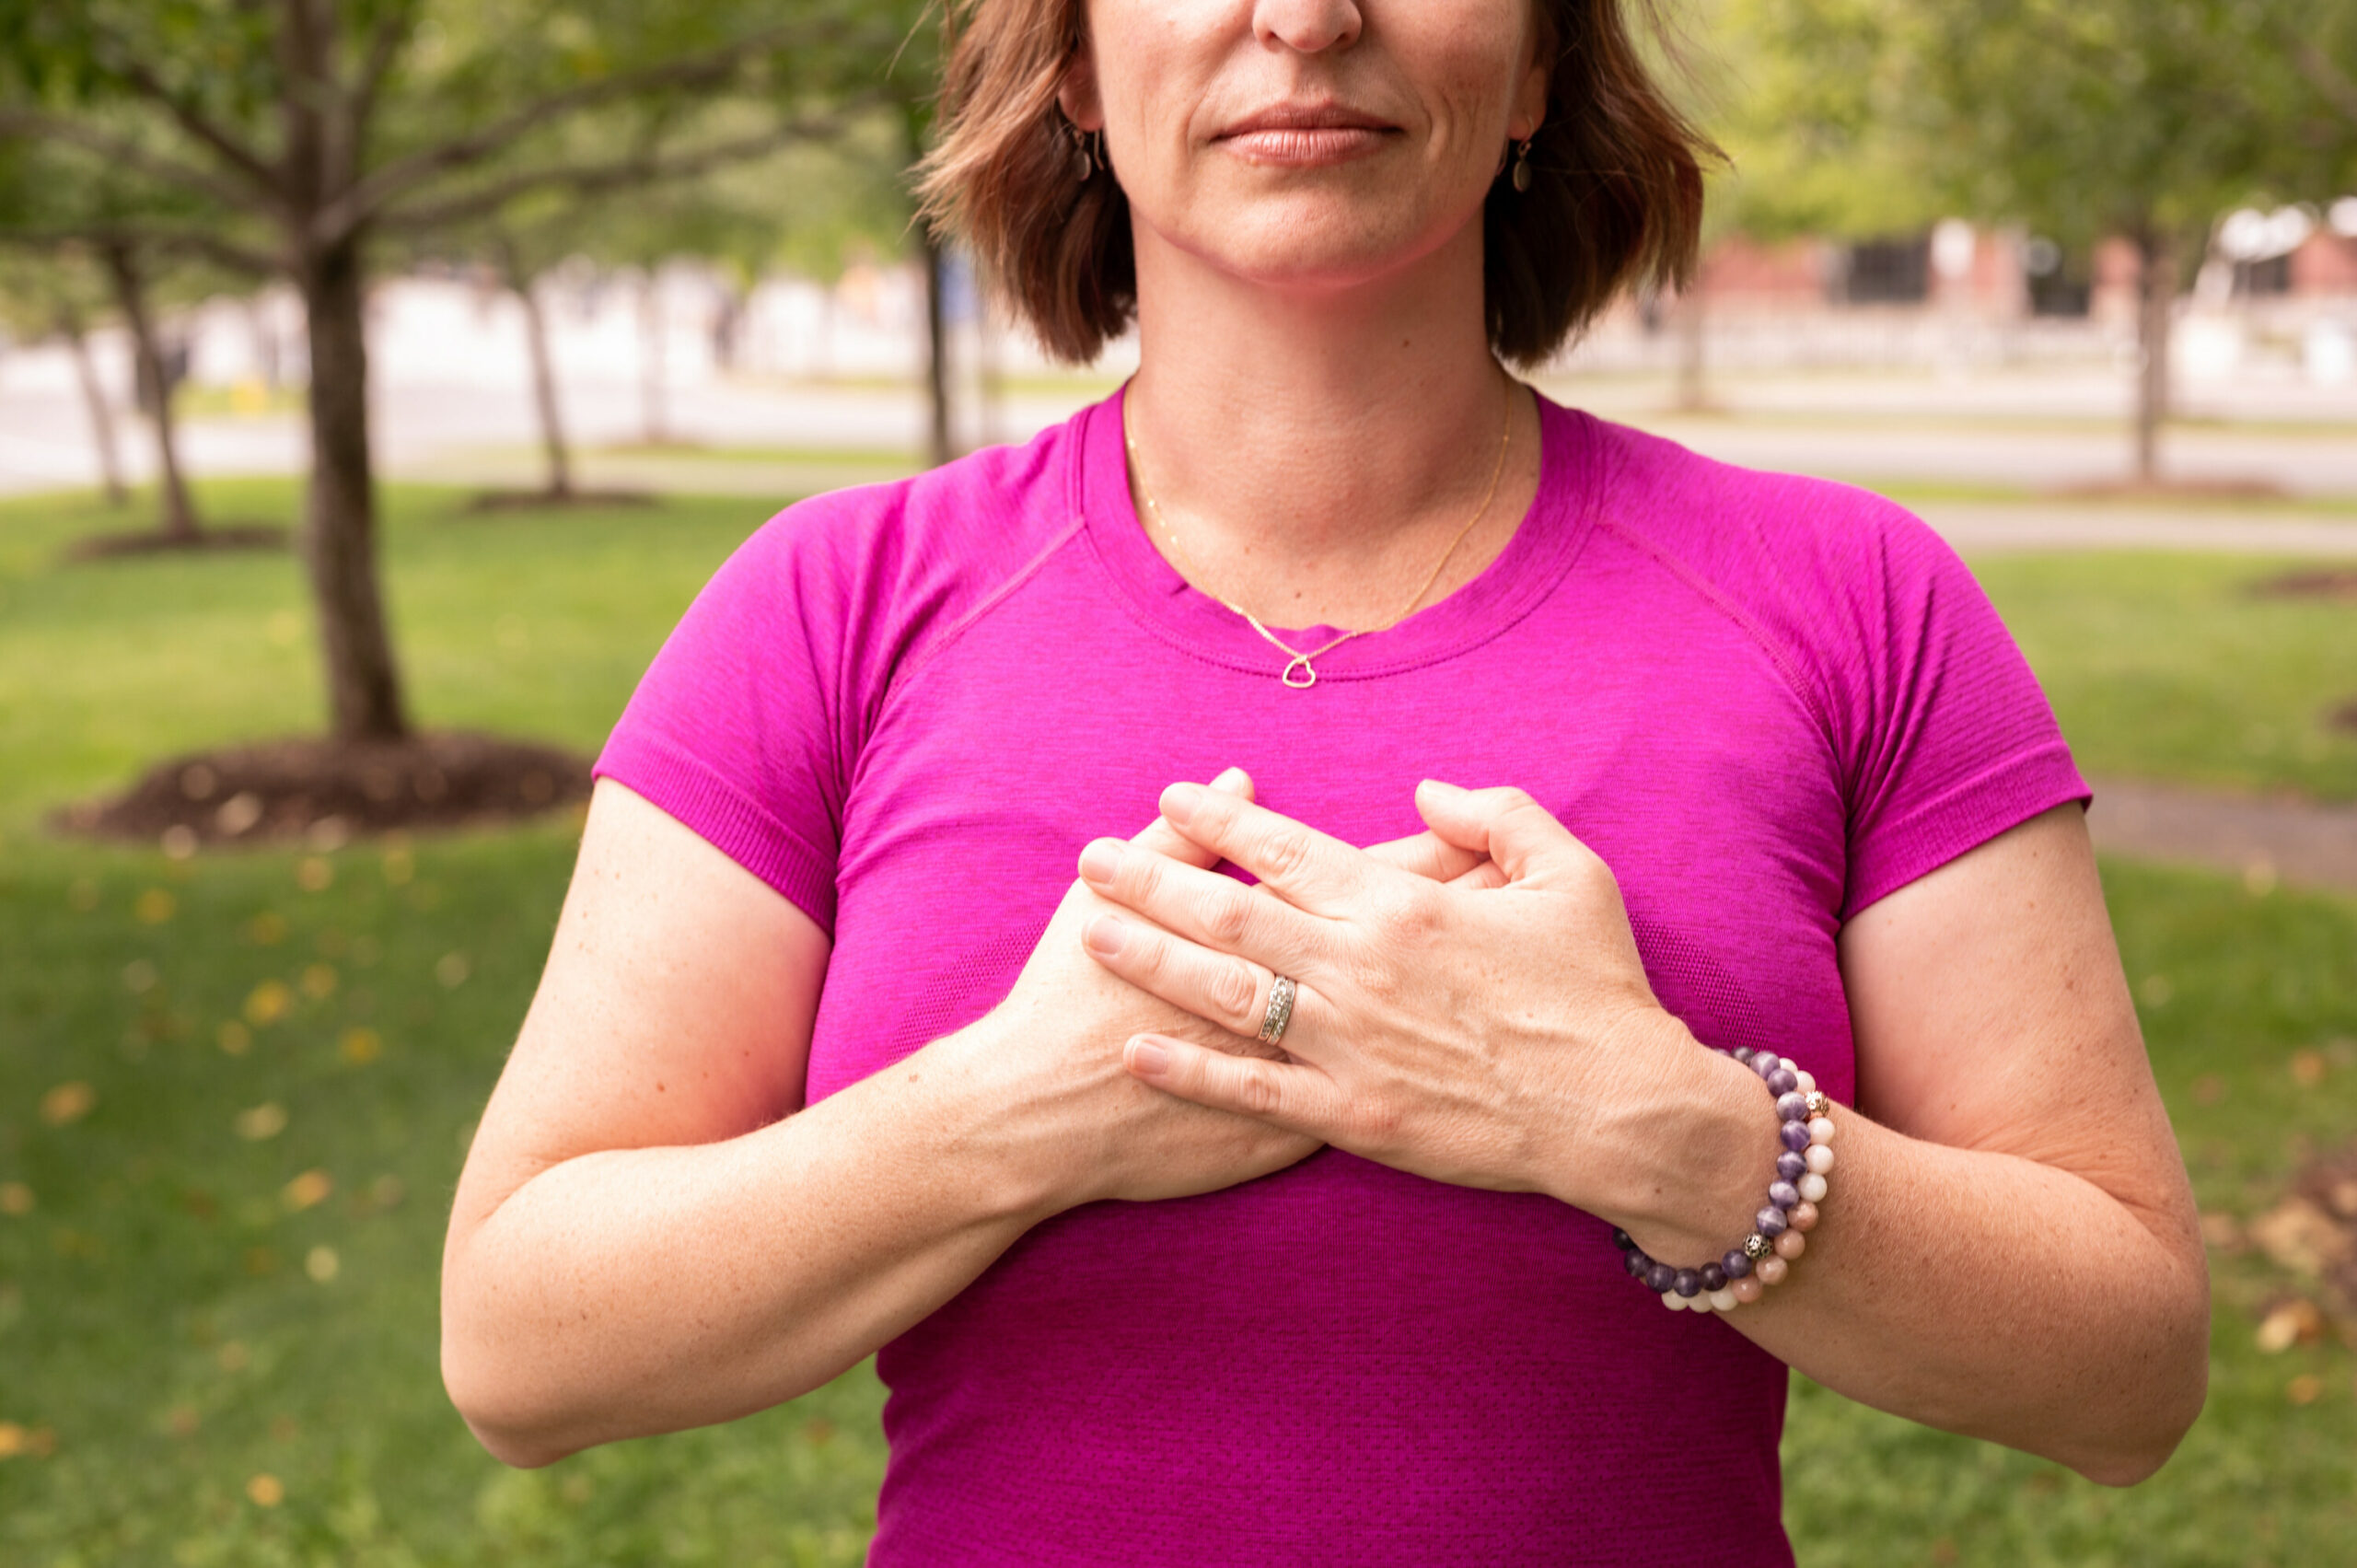 Cancer physiotherapist Beth Hoag is standing with her hands over her chest wearing a bright pink shirt.